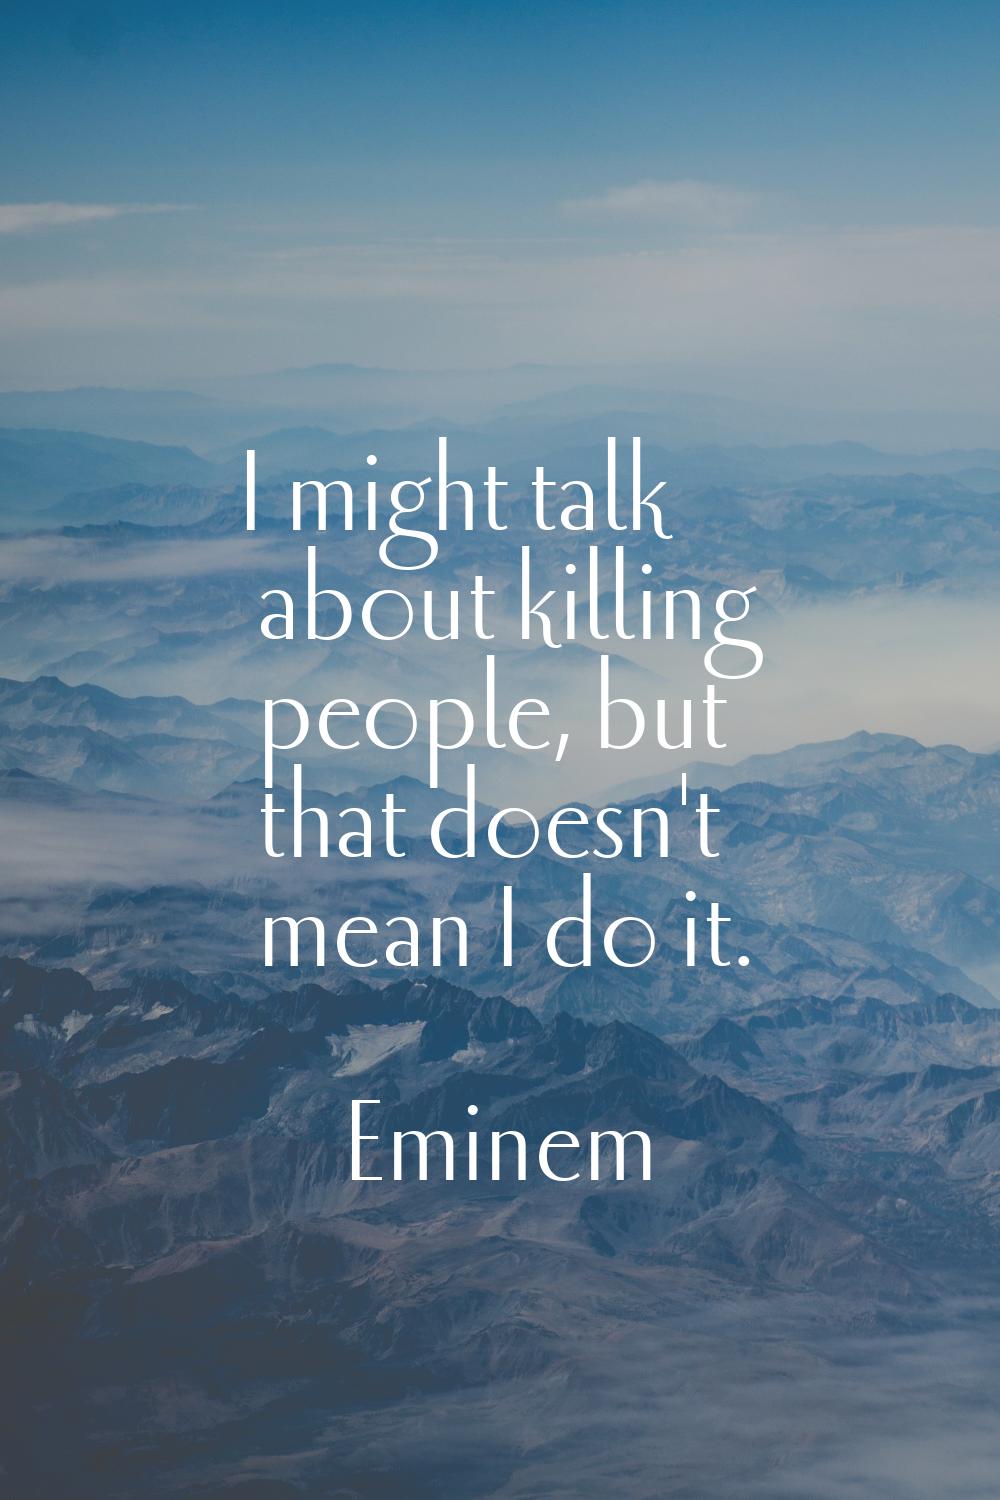 I might talk about killing people, but that doesn't mean I do it.